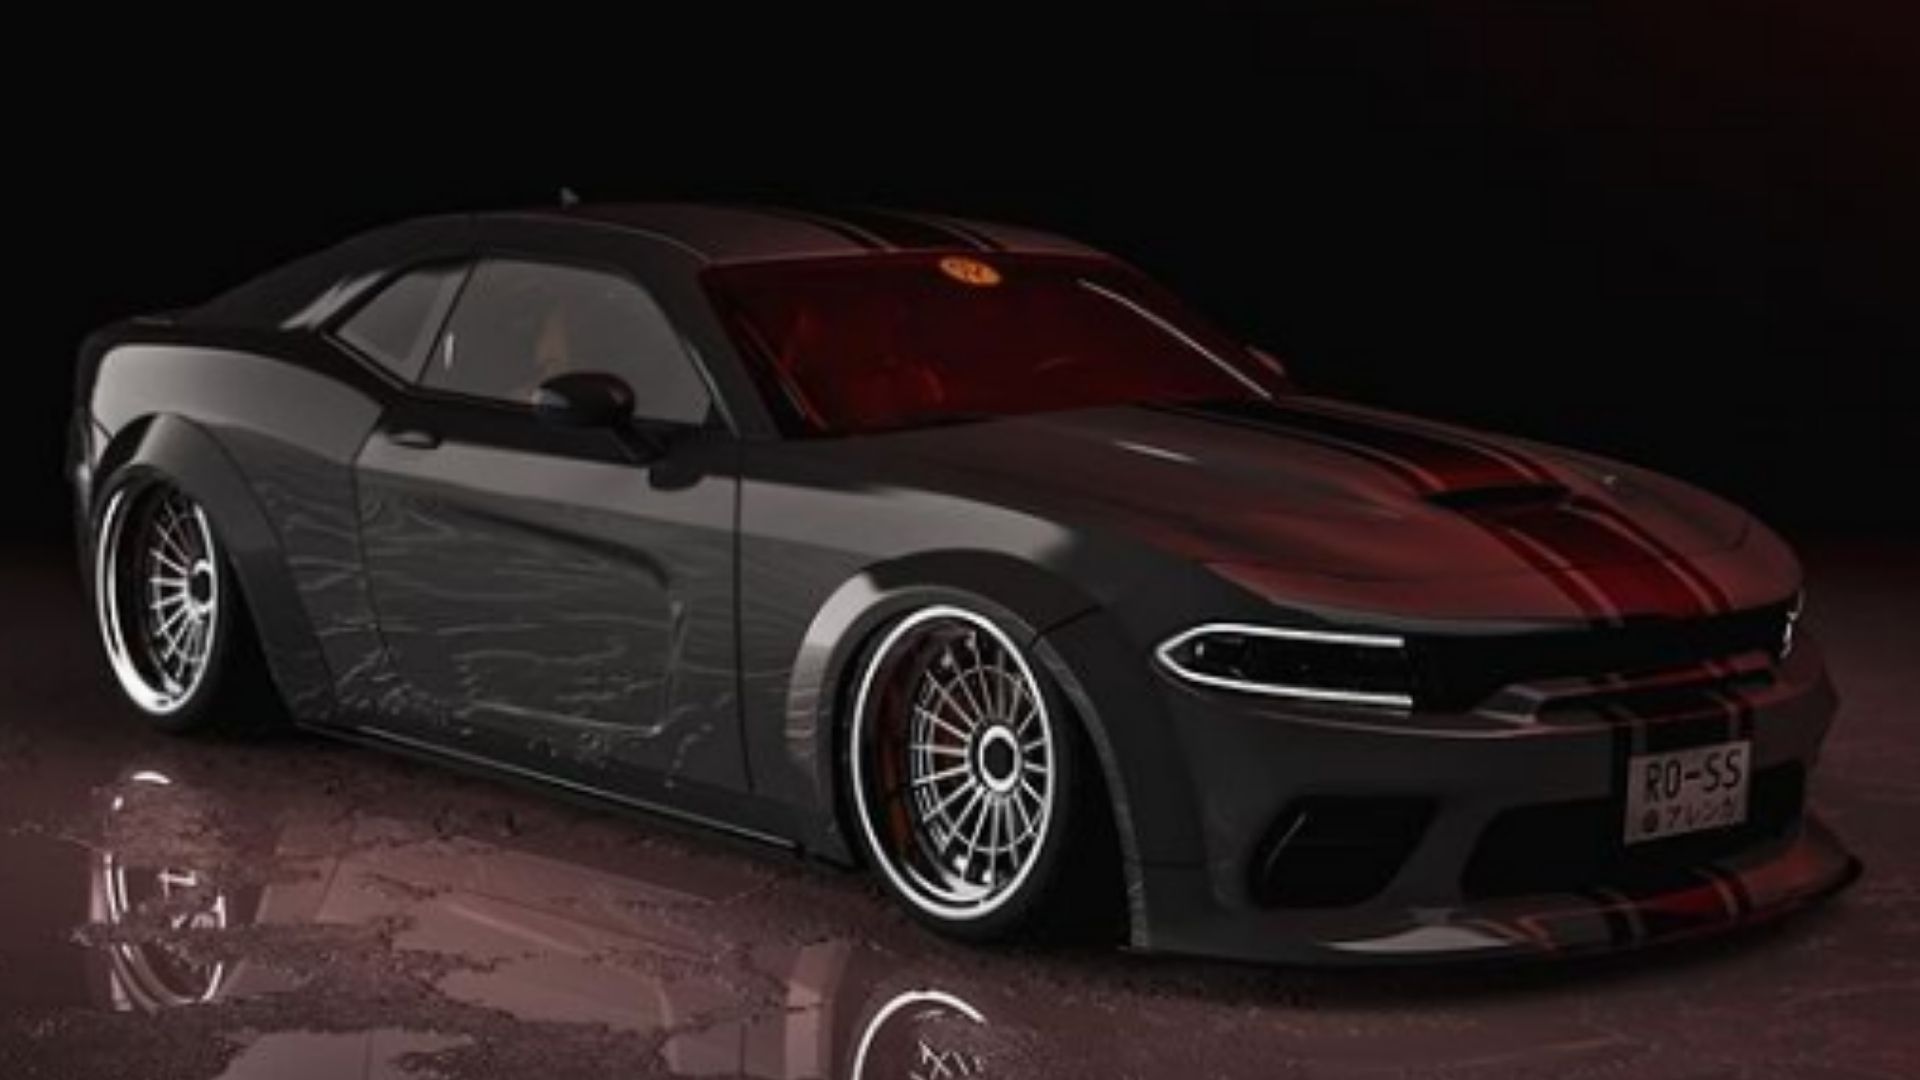 2022 dodge charger 2 door coupe